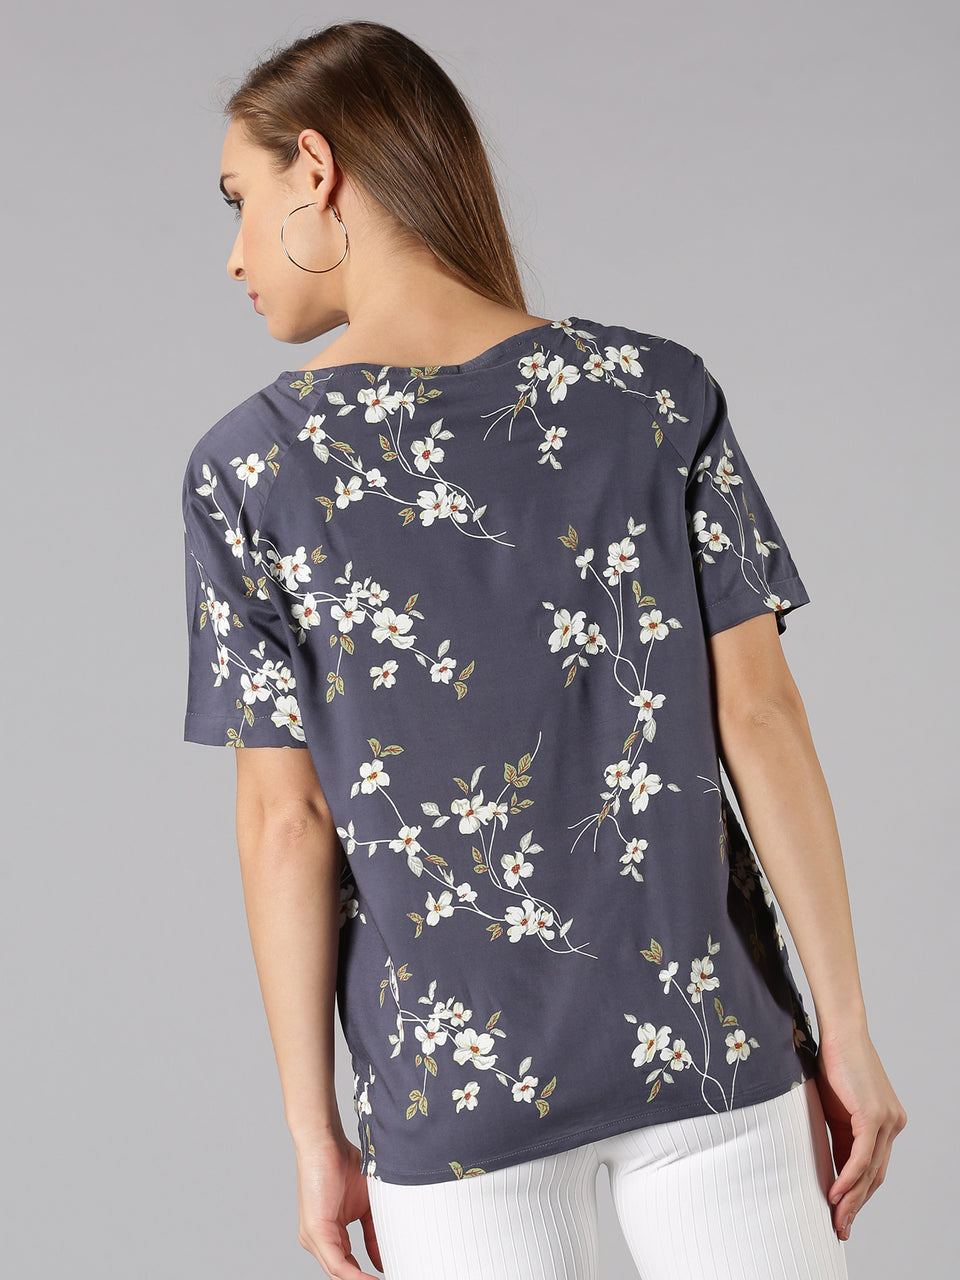 Women Navy Floral Printed Round Neck Casual T-Shirt